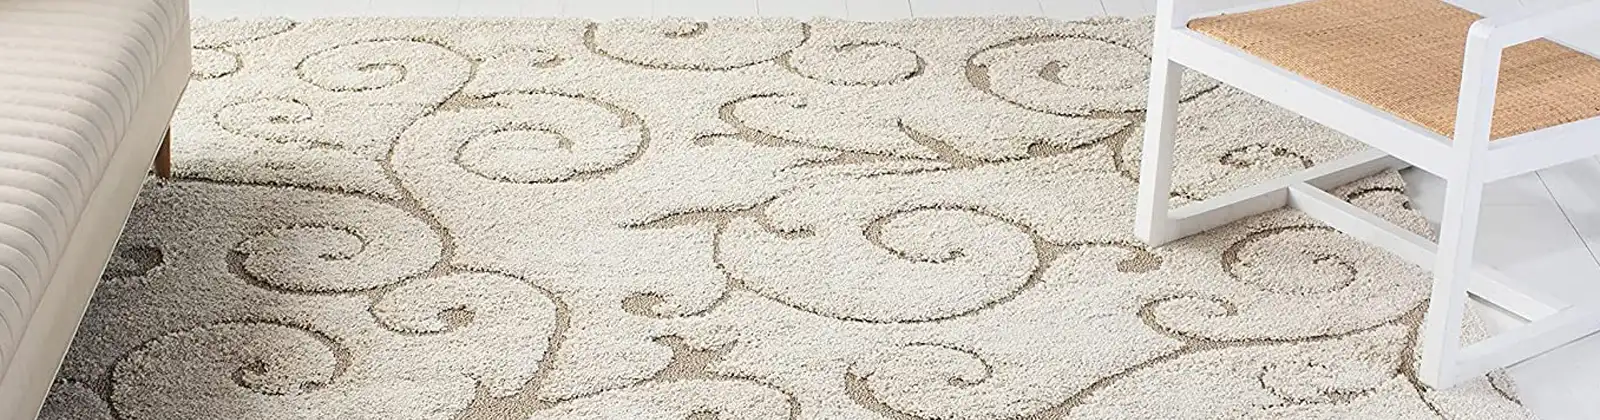 Area Rug Cleaning Services in Pompano Beach